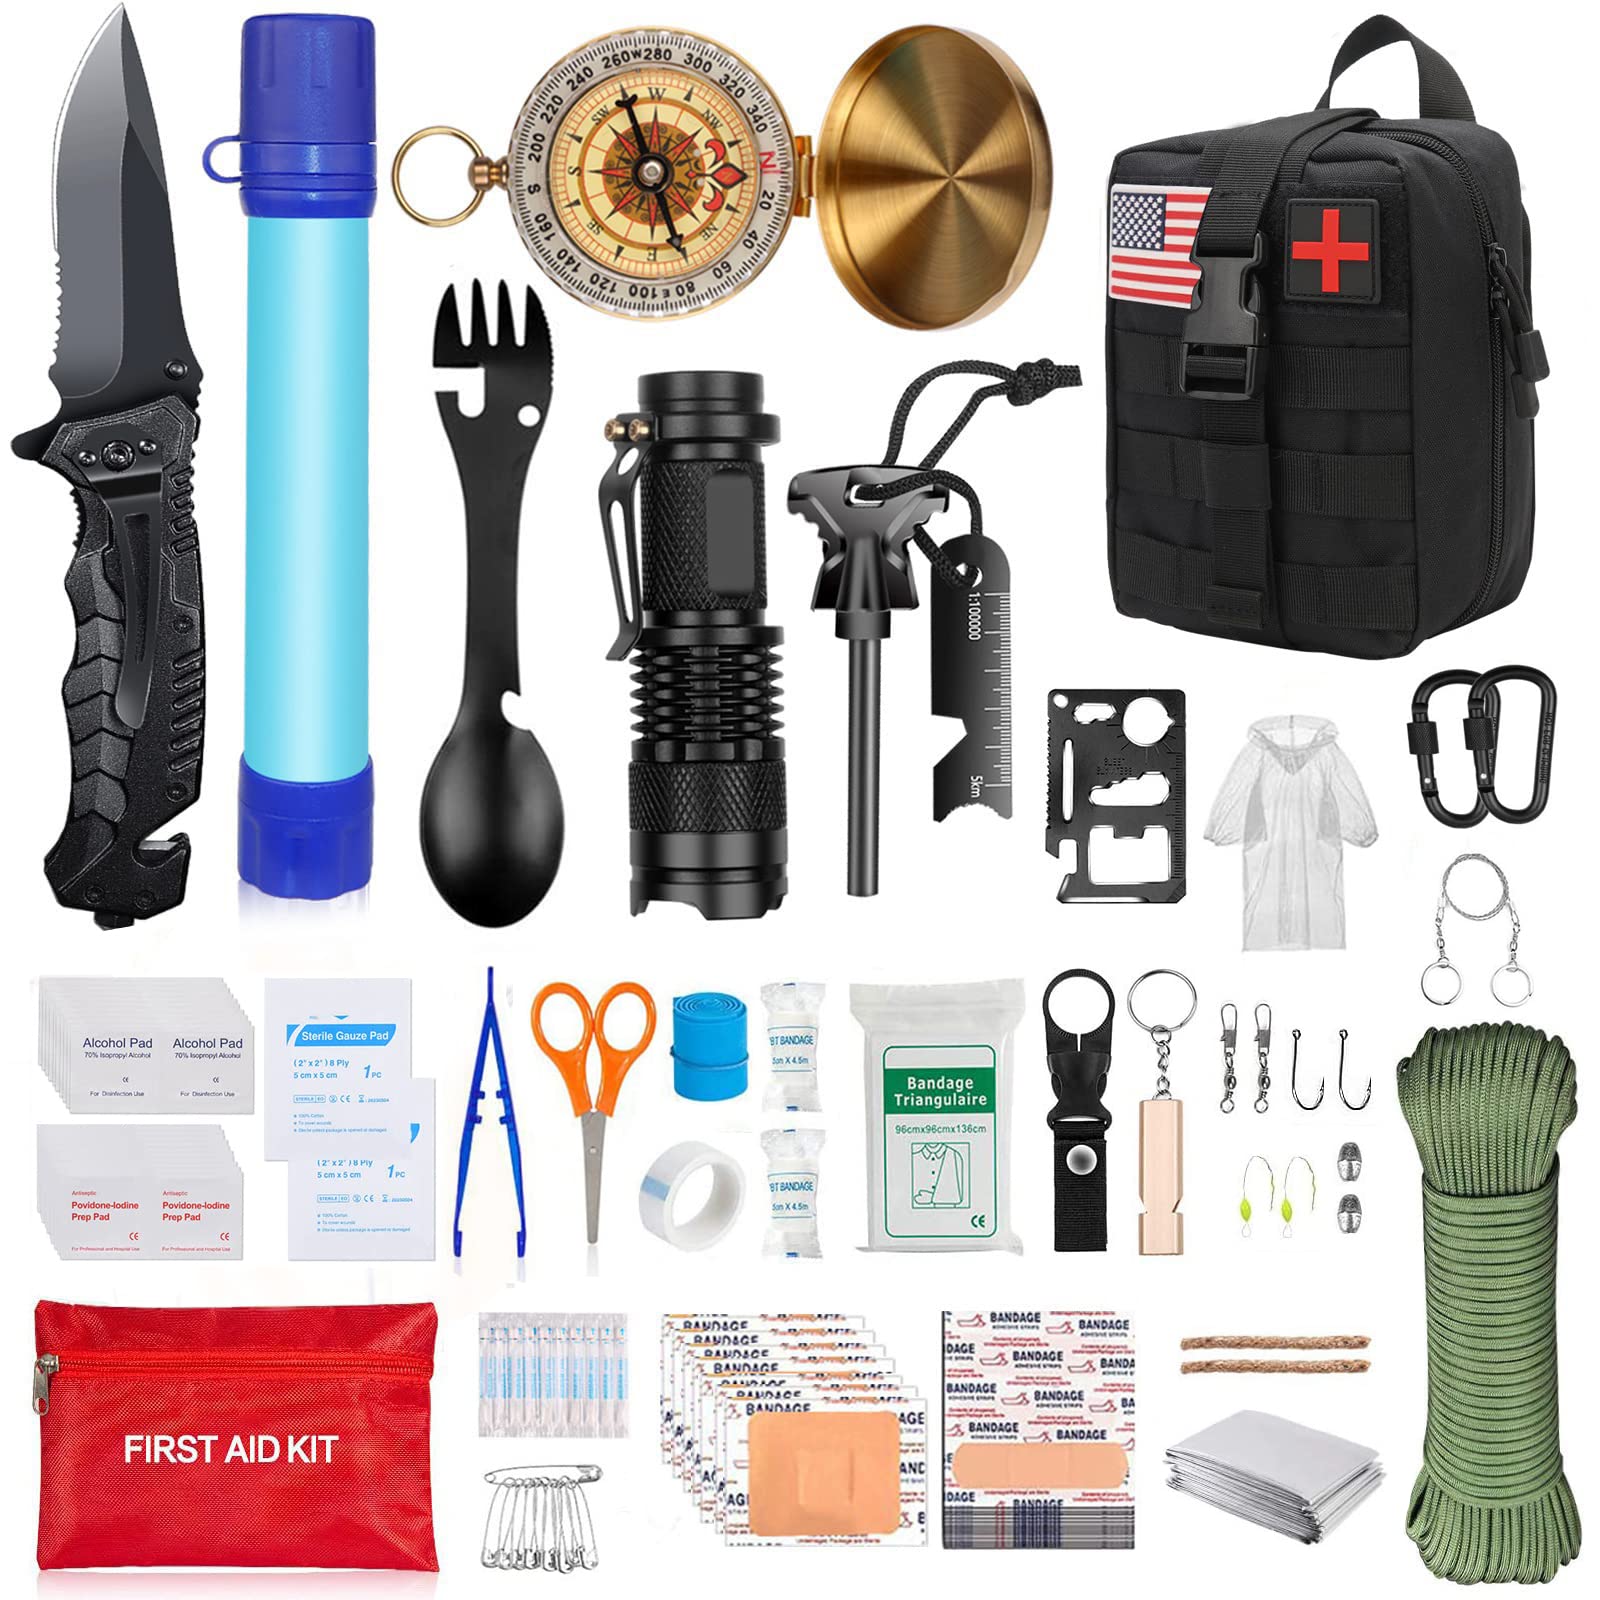 Survival Kit and First Aid Kit,Unique Gifts for Men Teenage boy Husband dad  Kid,Survival Gear and Equipment for Camping Fishing Hunting Black Aid kits  with raincoat